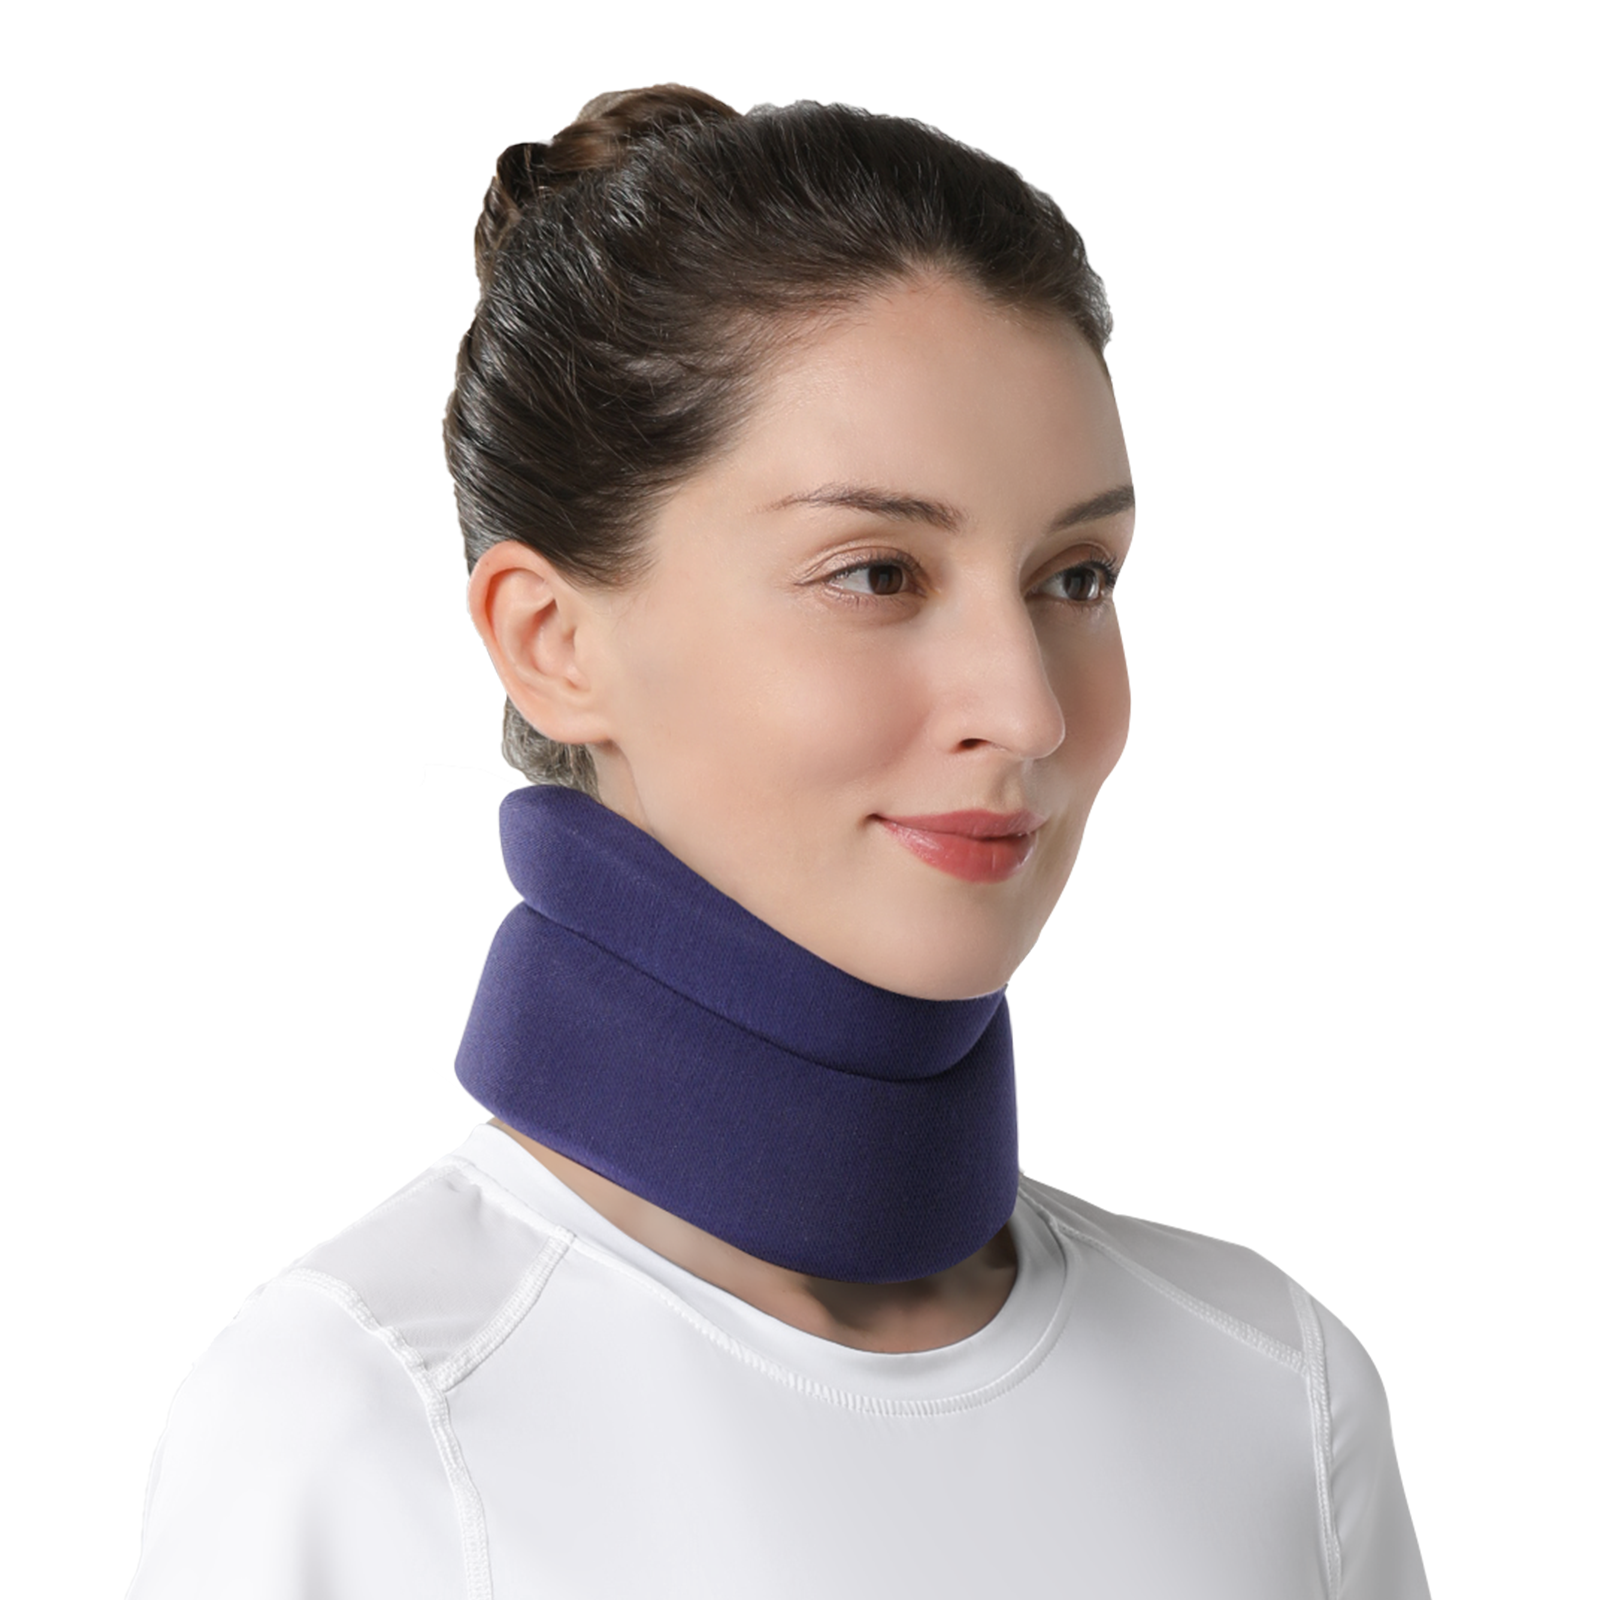 Memory Foam Neck Brace Cervical Collar, Relieves Neck And Spine Pressure,  Neck Collar, Ergonomic Neck Support Brace For Men Women, Provide Support  For People Working With Head Down, Neck Massager Warmer, Travel